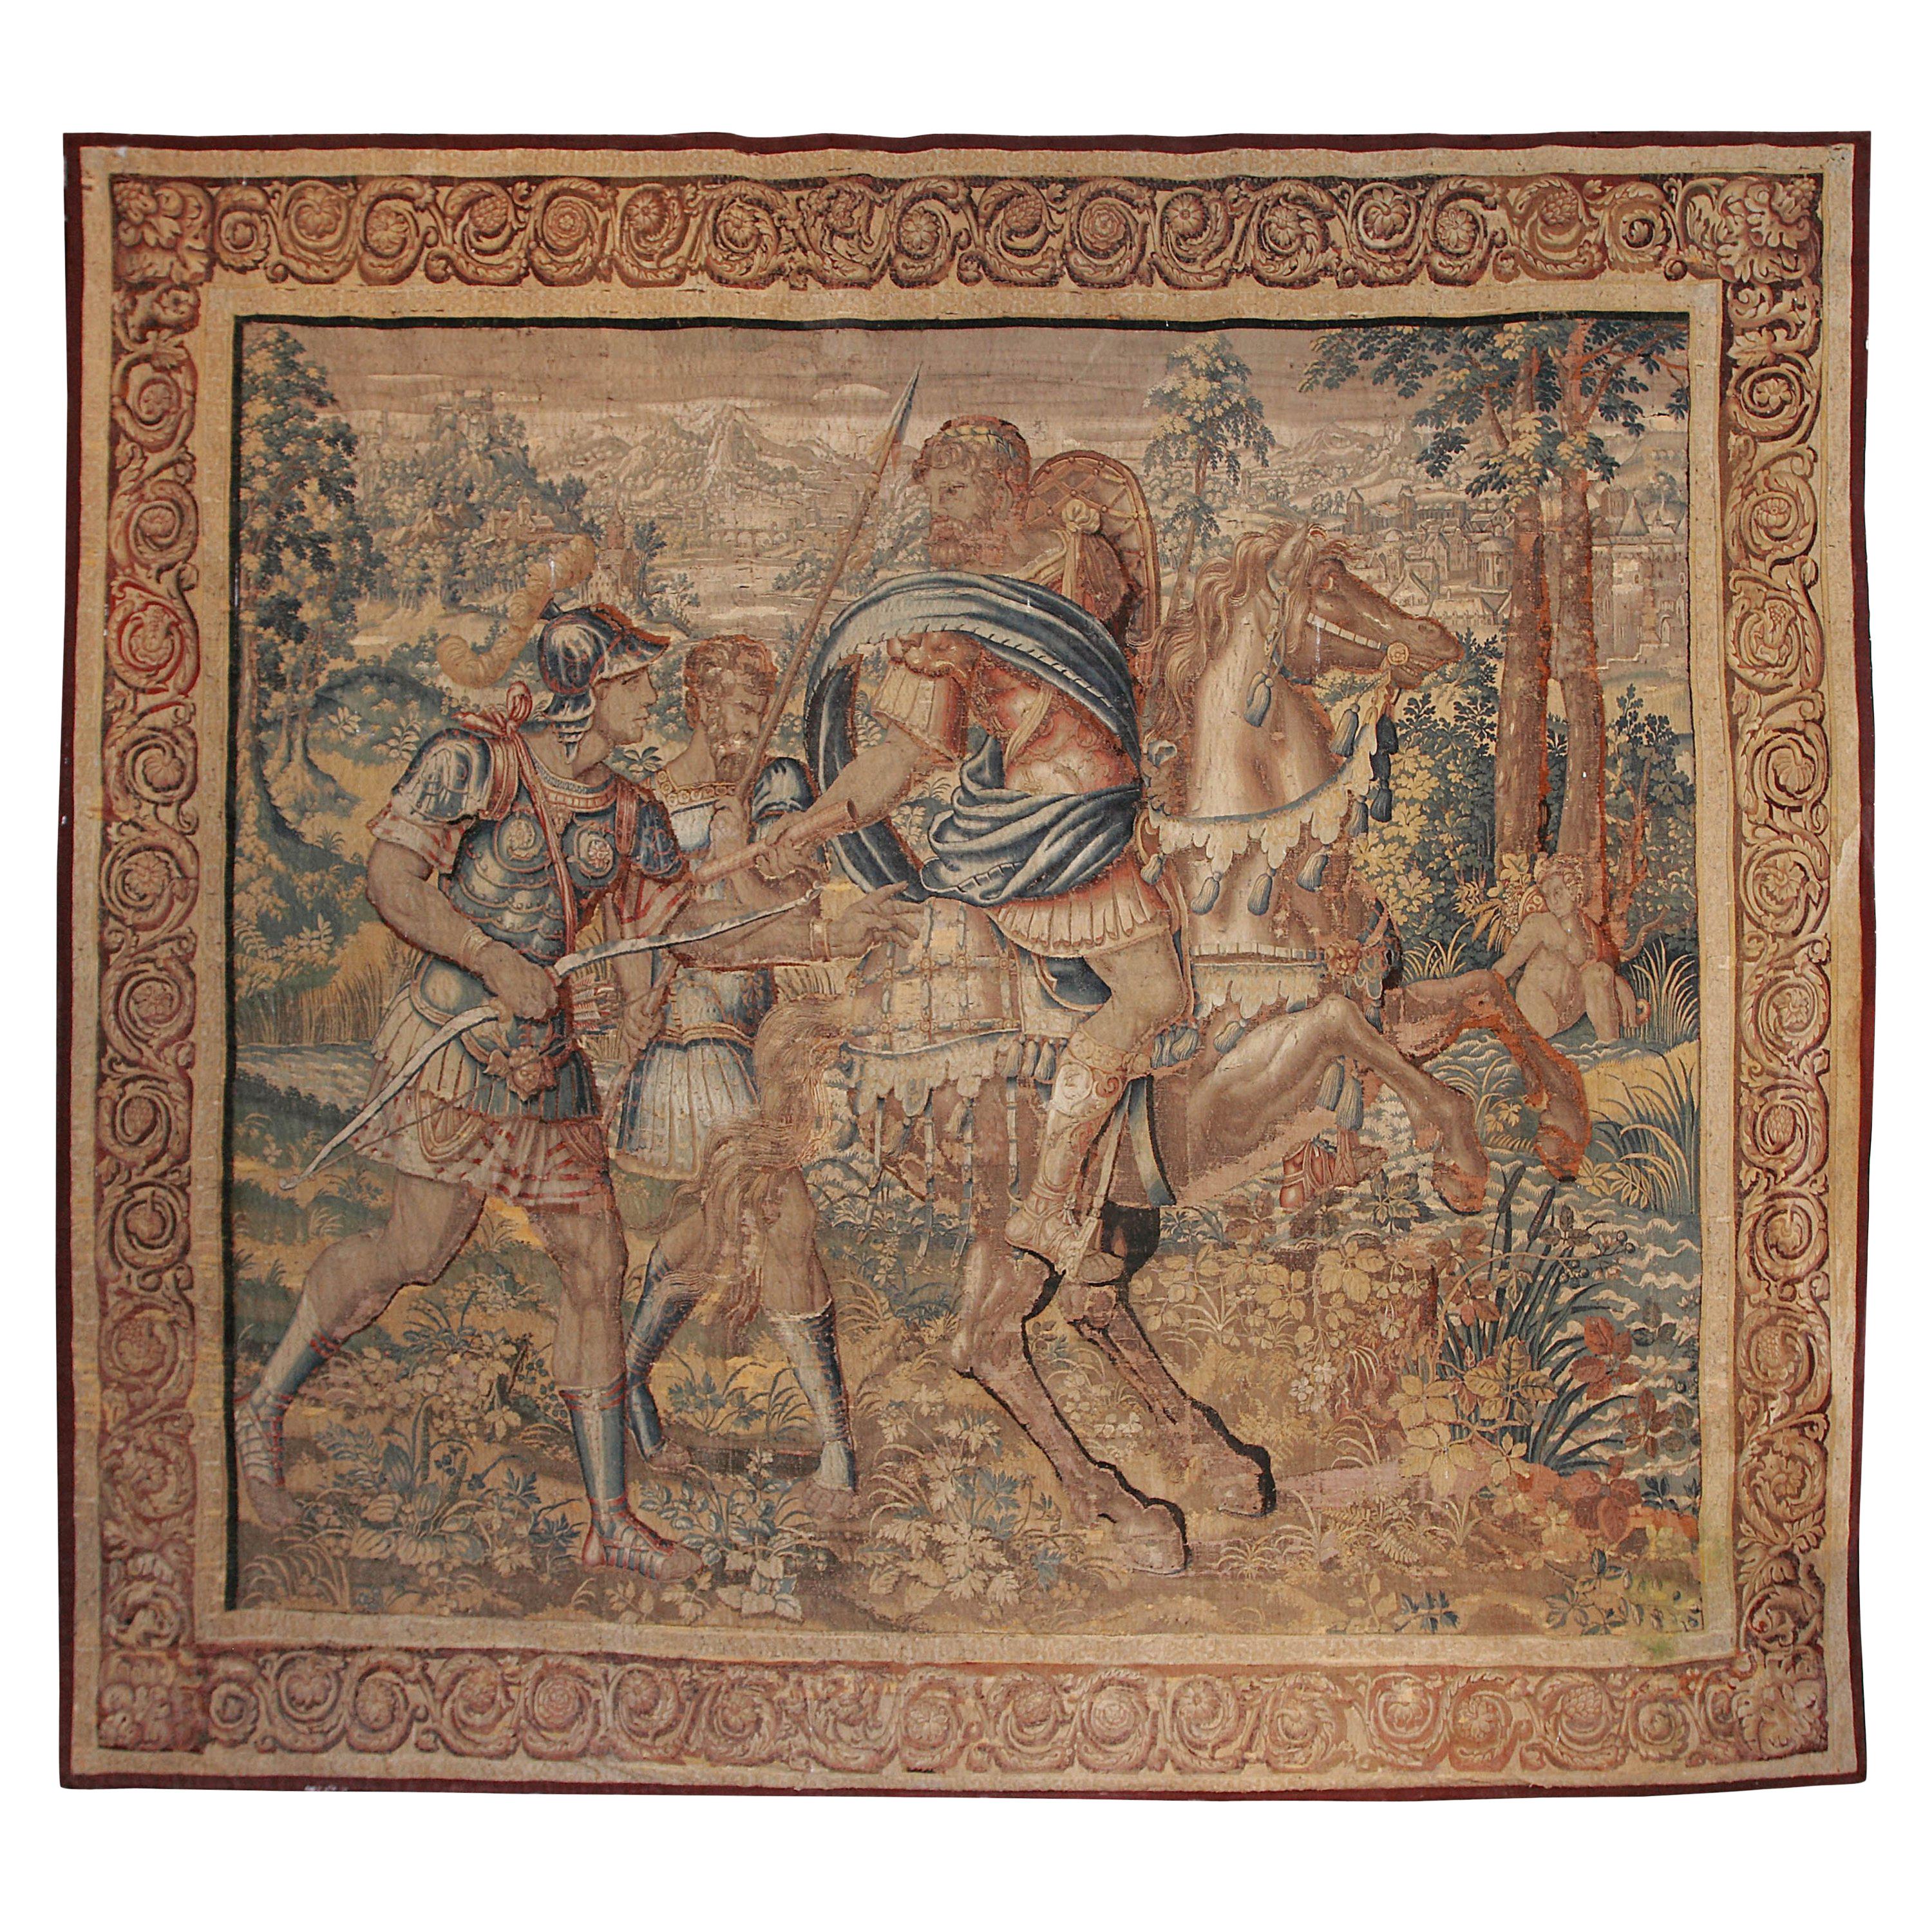 Large 17th Century Flanders Tapestry Depicting a Roman Scene